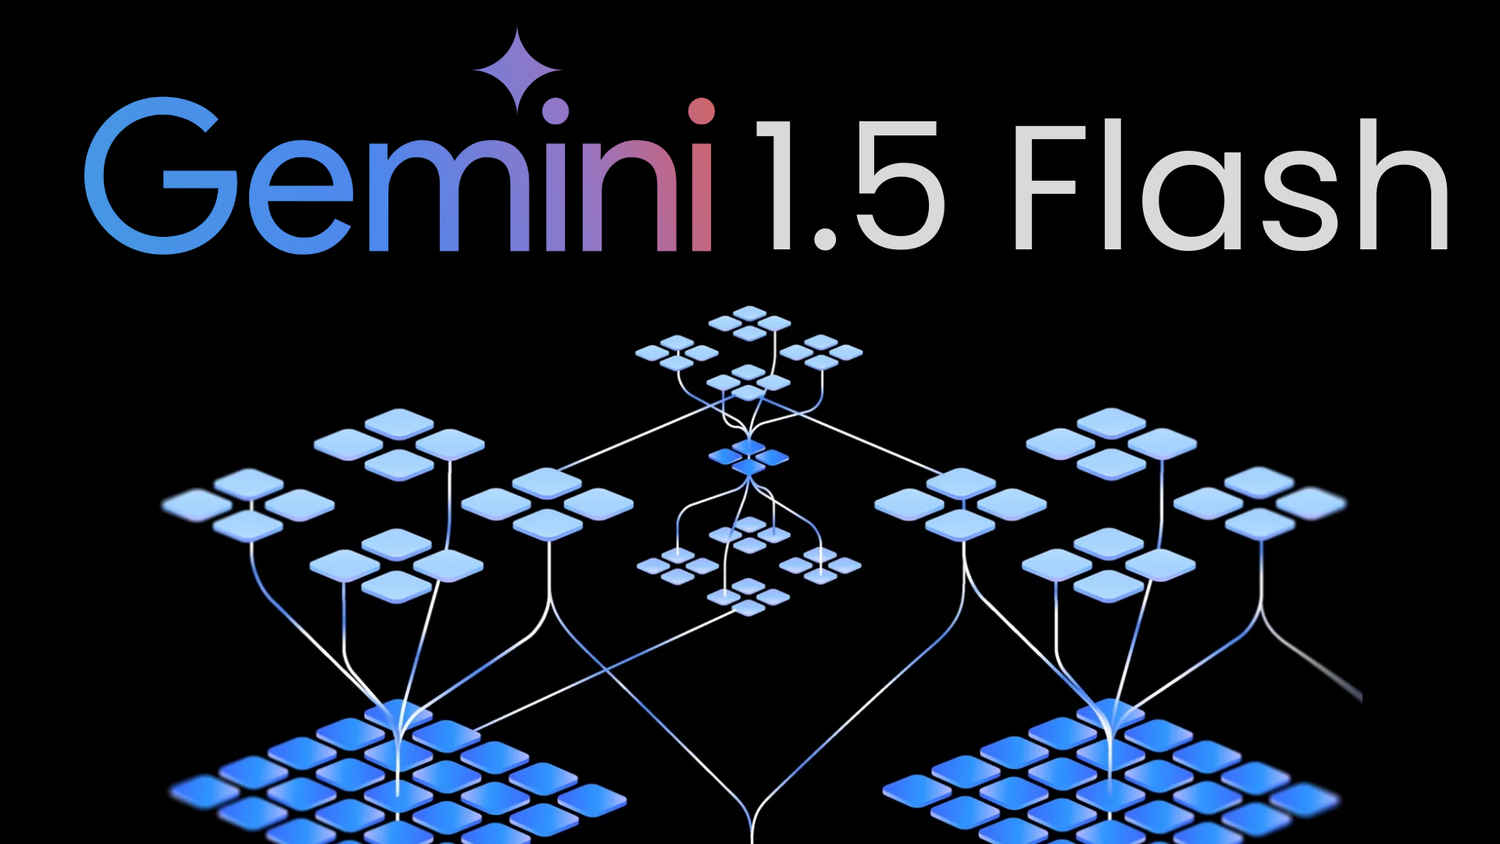 Google Gemini 1.5 Flash is here for unpaid users: Here’s what it can do